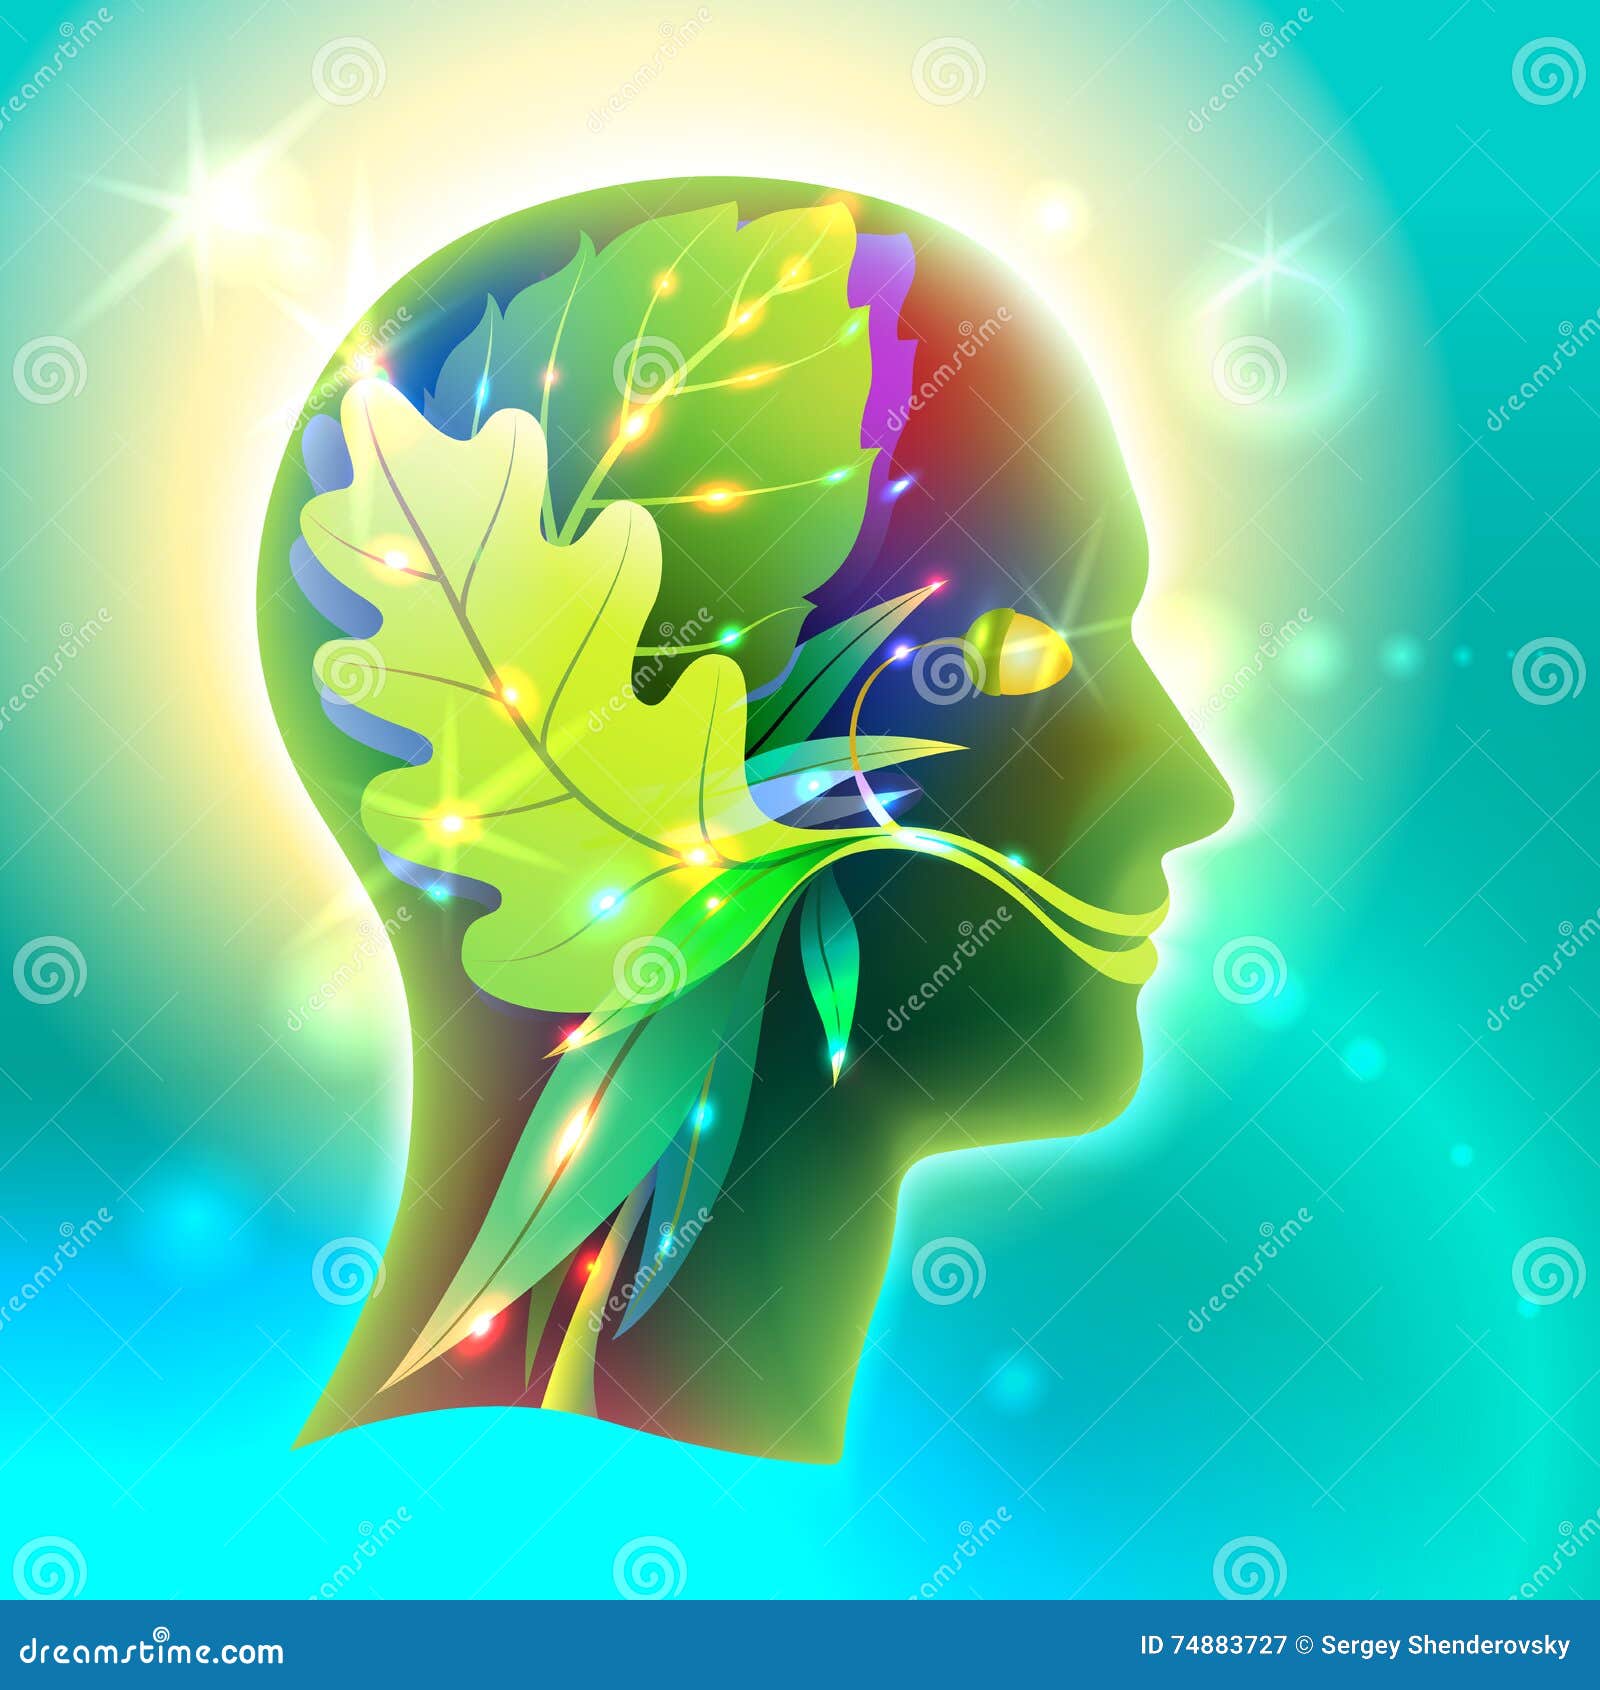 Profile of the Head of Man As Nature Stock Vector - Illustration of design, 74883727